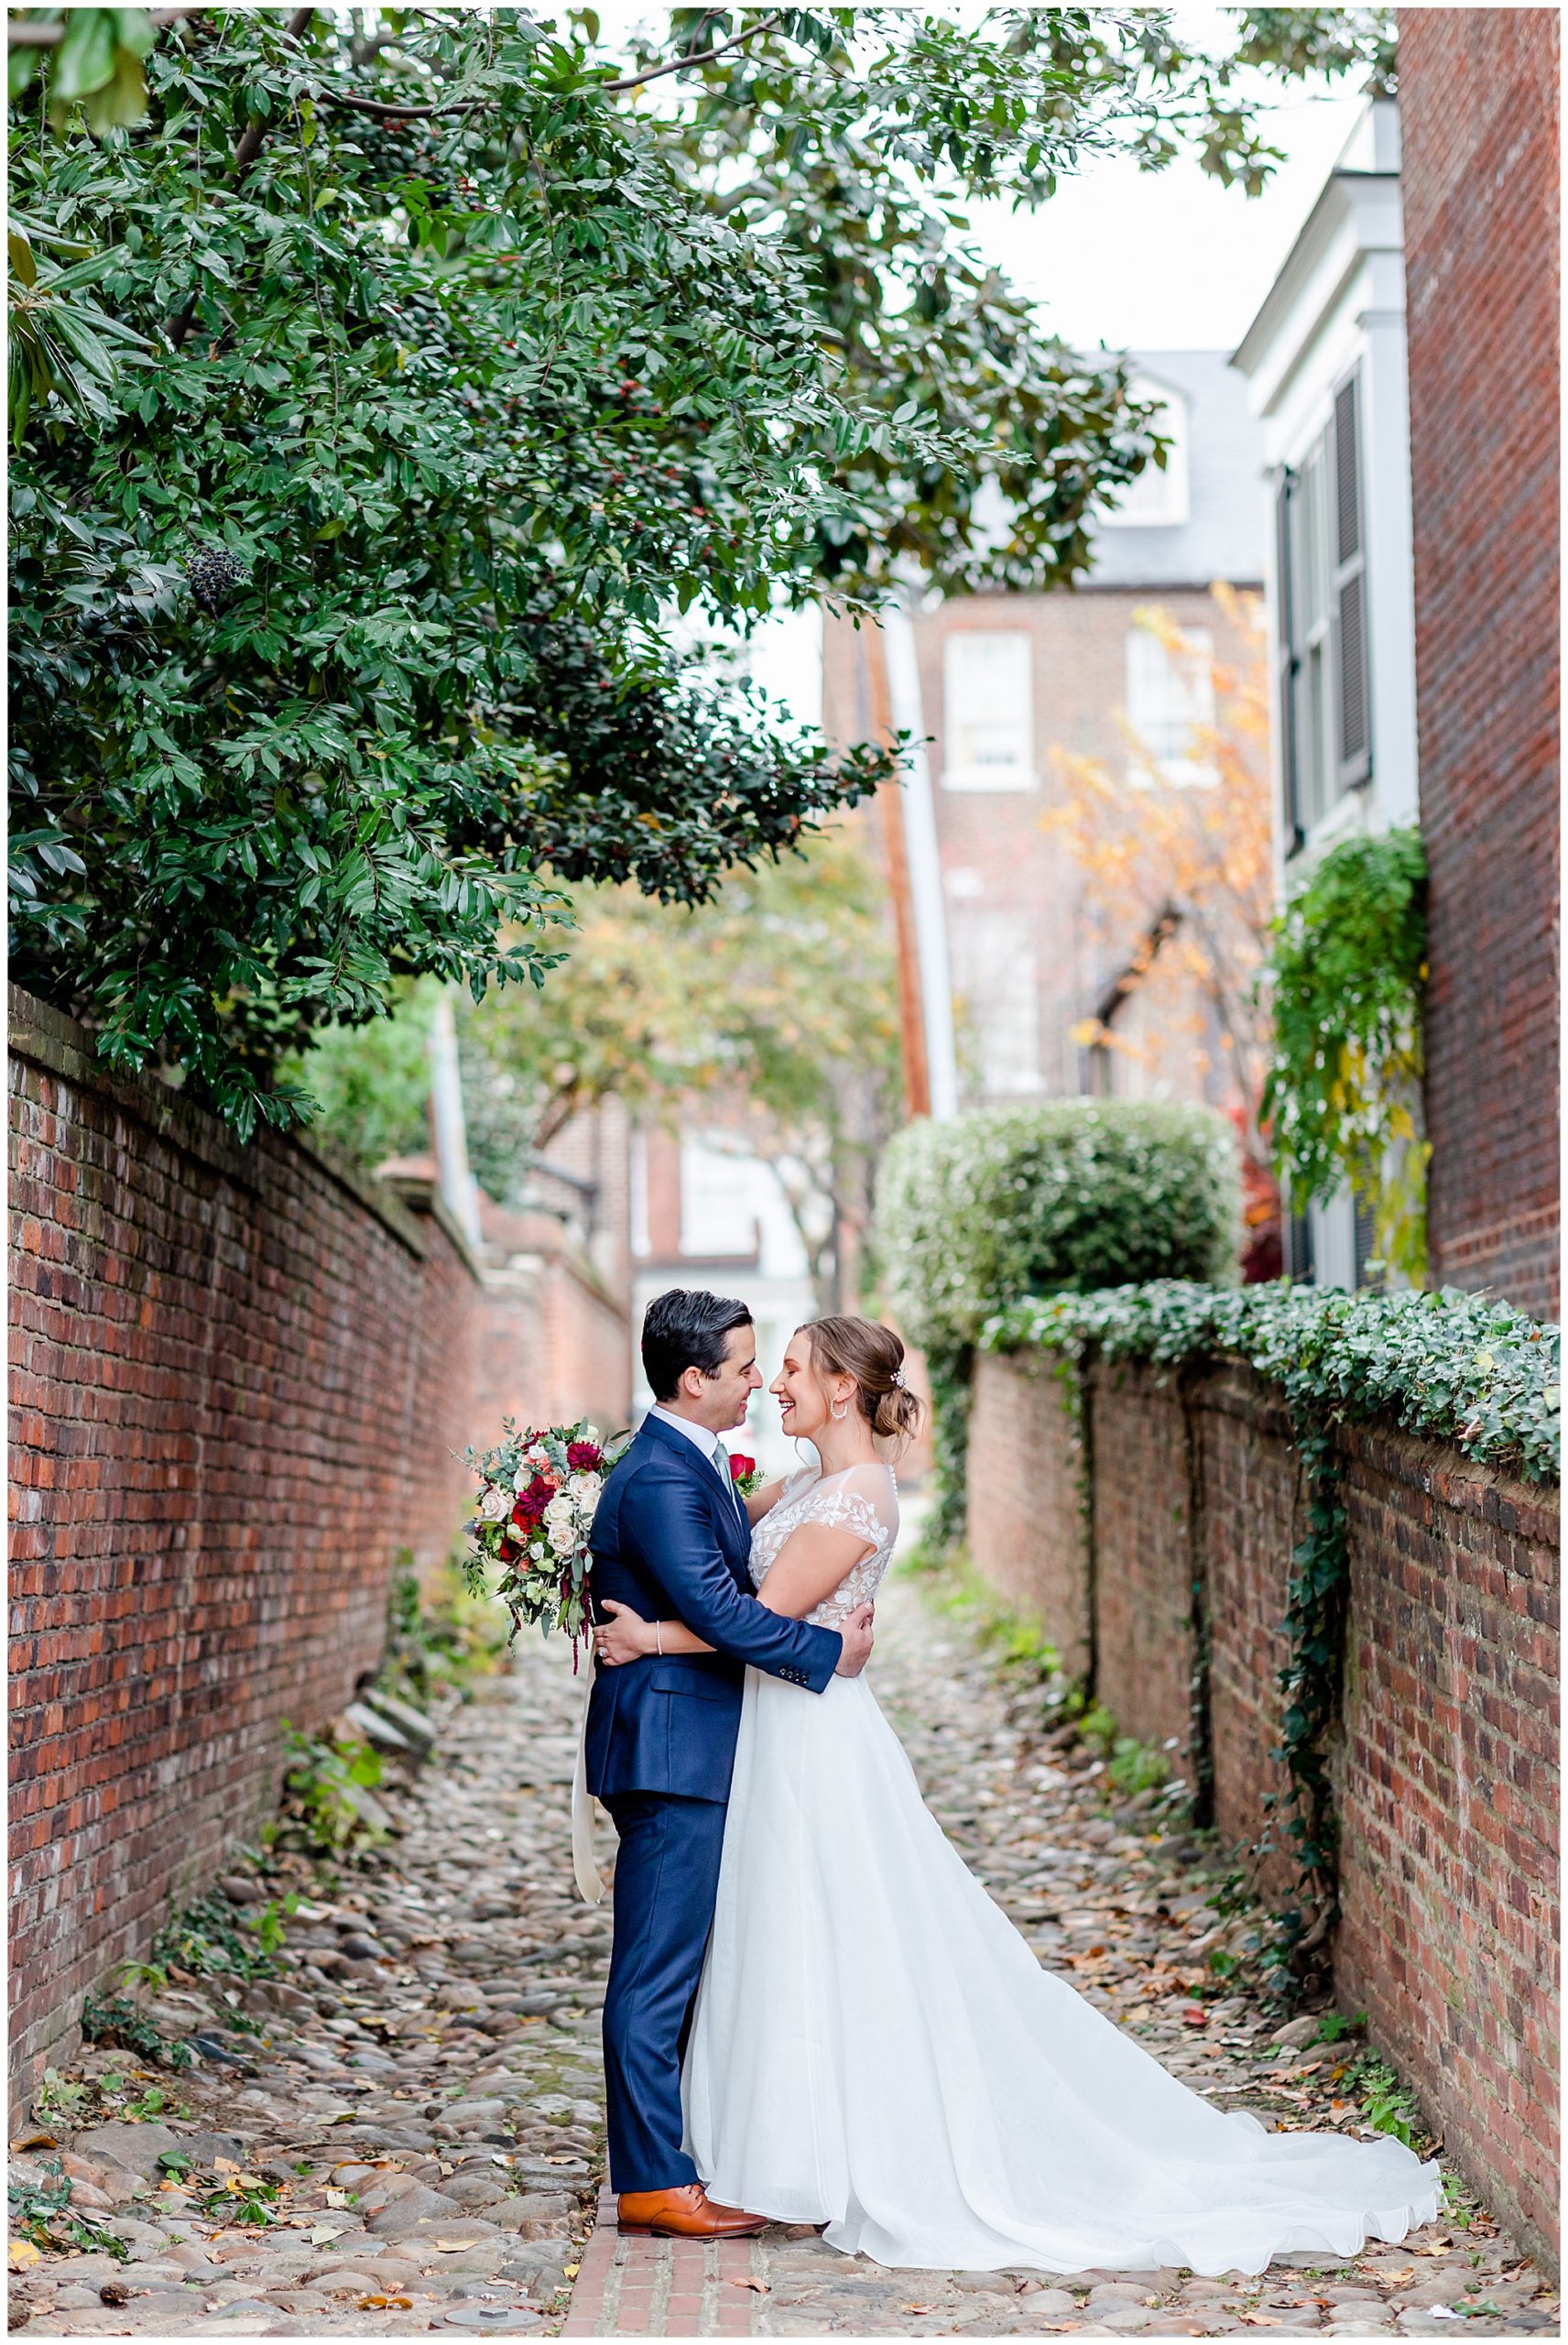 Lorien Alexandria winter wedding, Old Town Alexandria wedding, Alexandria Virginia wedding, DC micro wedding, northern Virginia wedding photographer, Alexandria Virginia wedding photographer, DC wedding photographer, winter wedding aesthetic, Rachel E.H. Photography, bride and groom holding each other, bride and groom in alleyway